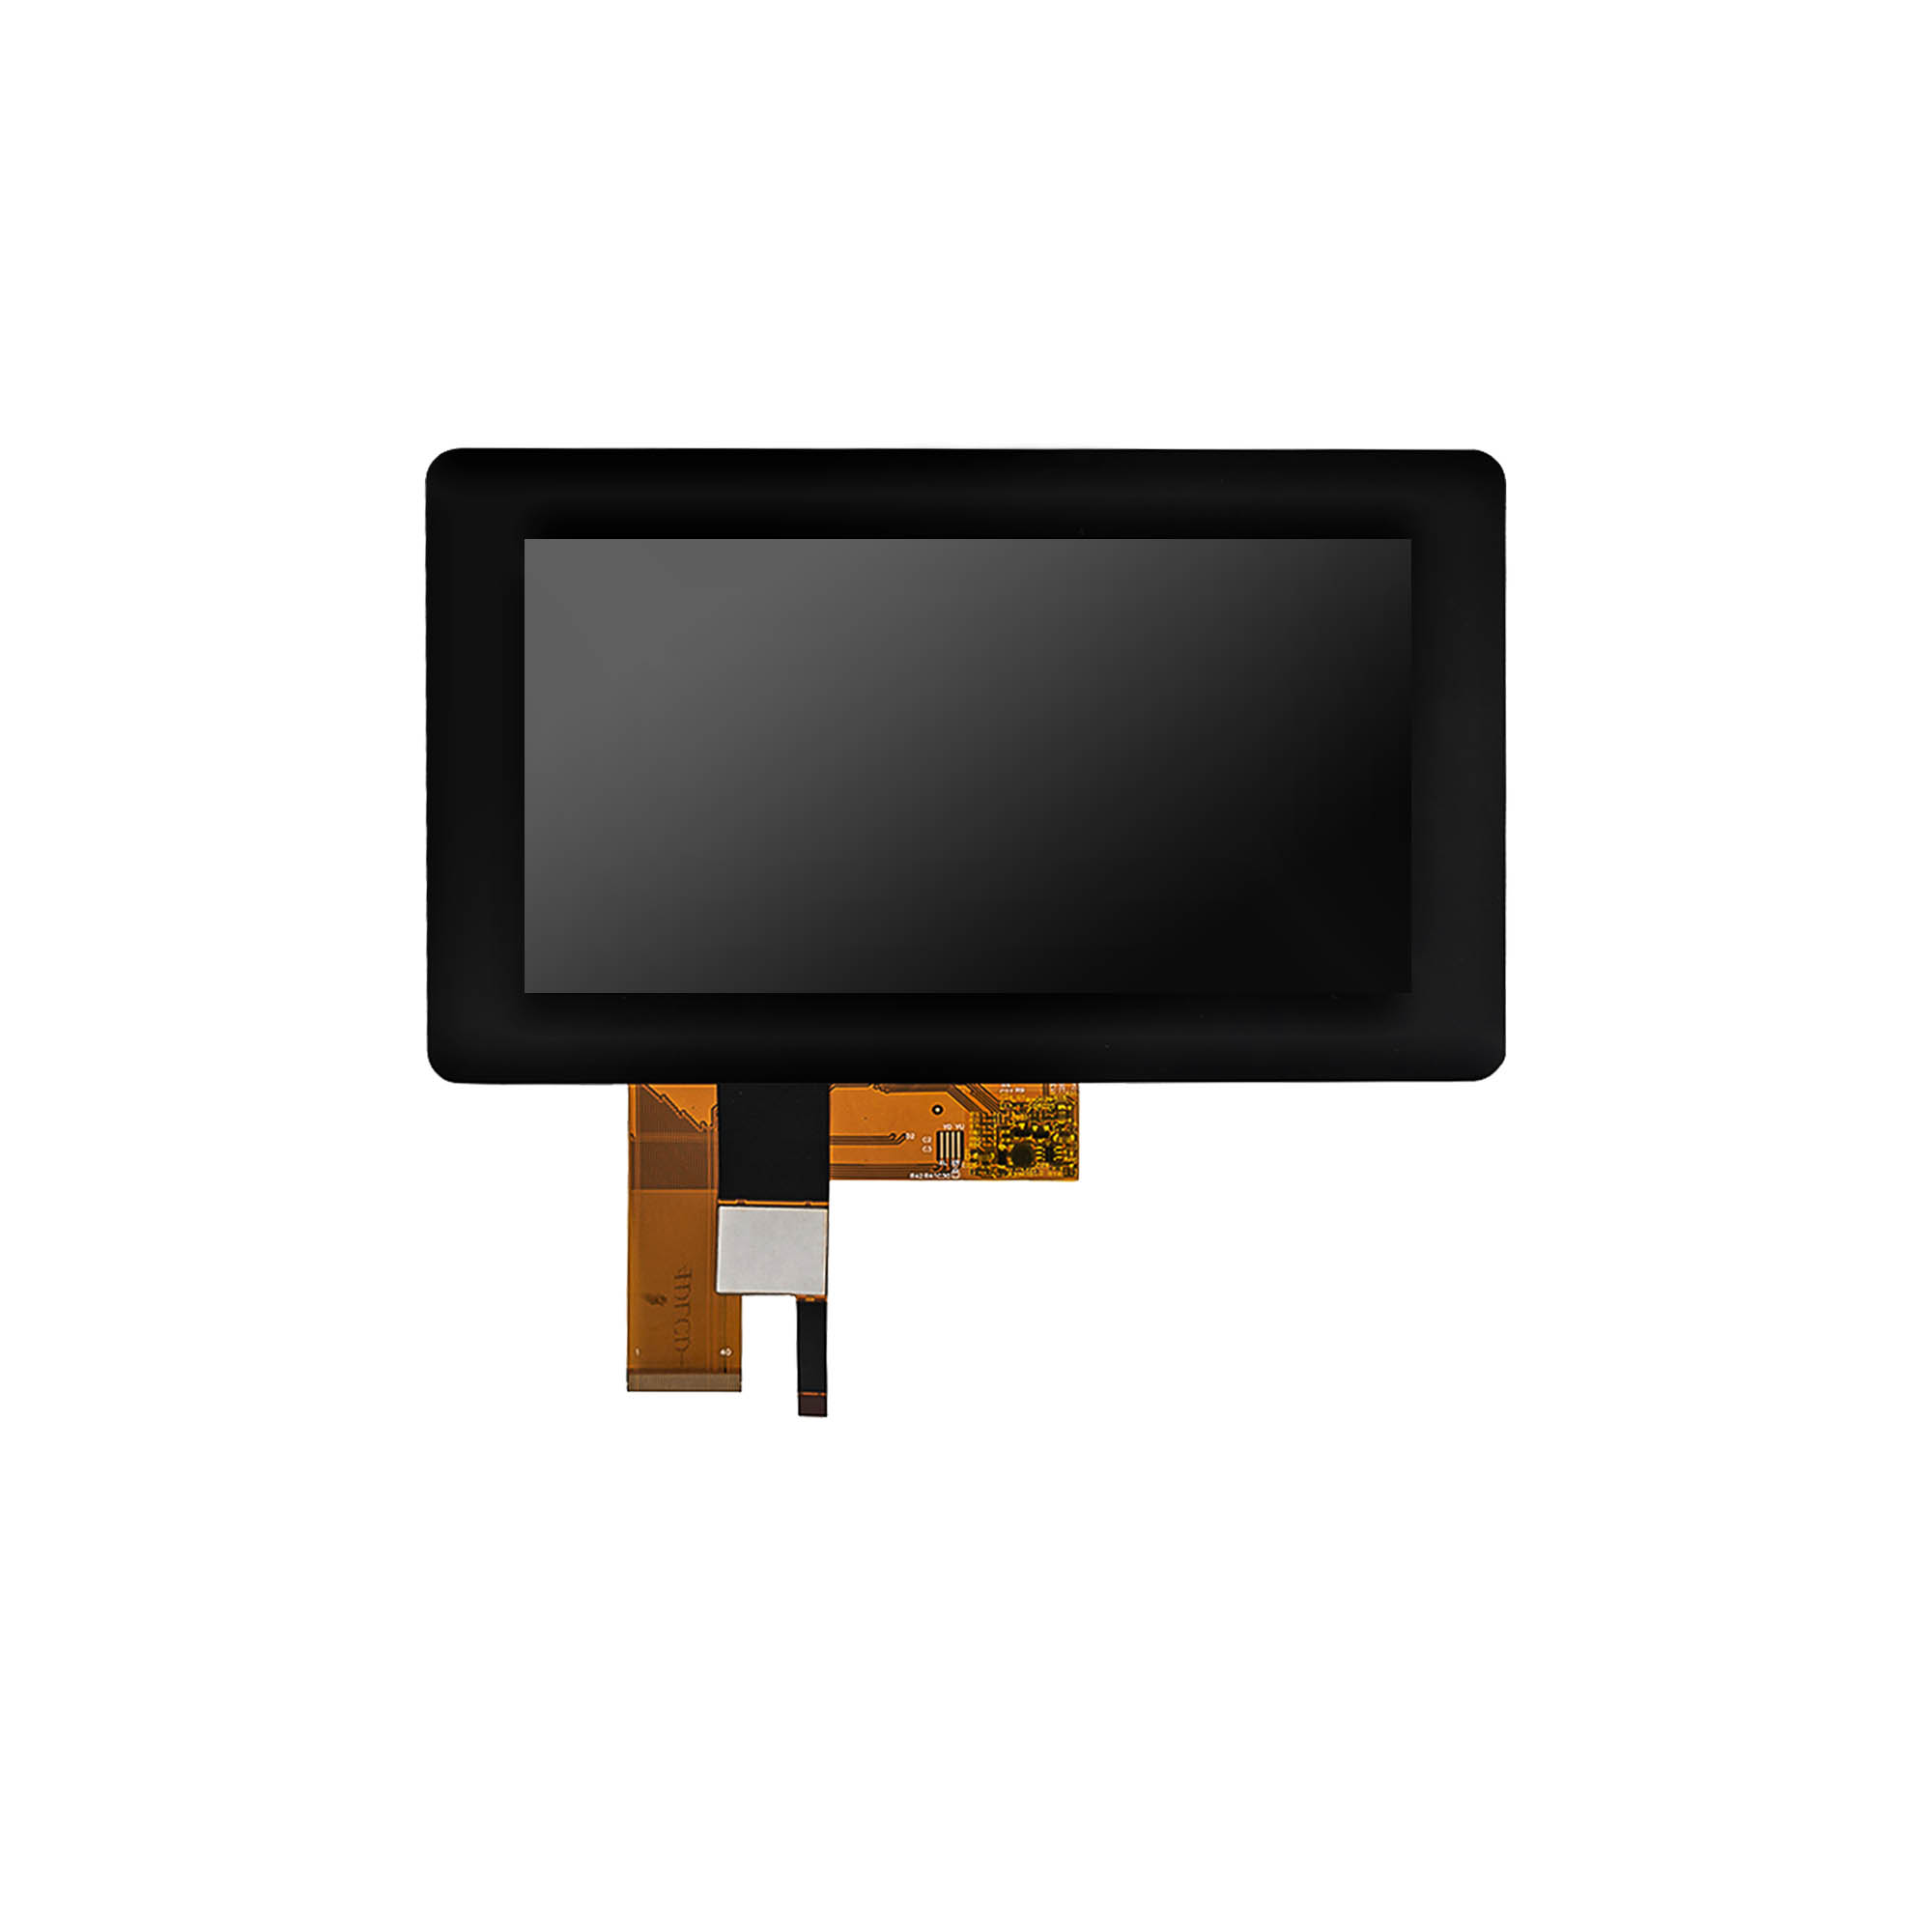 A basic introduction to LCD